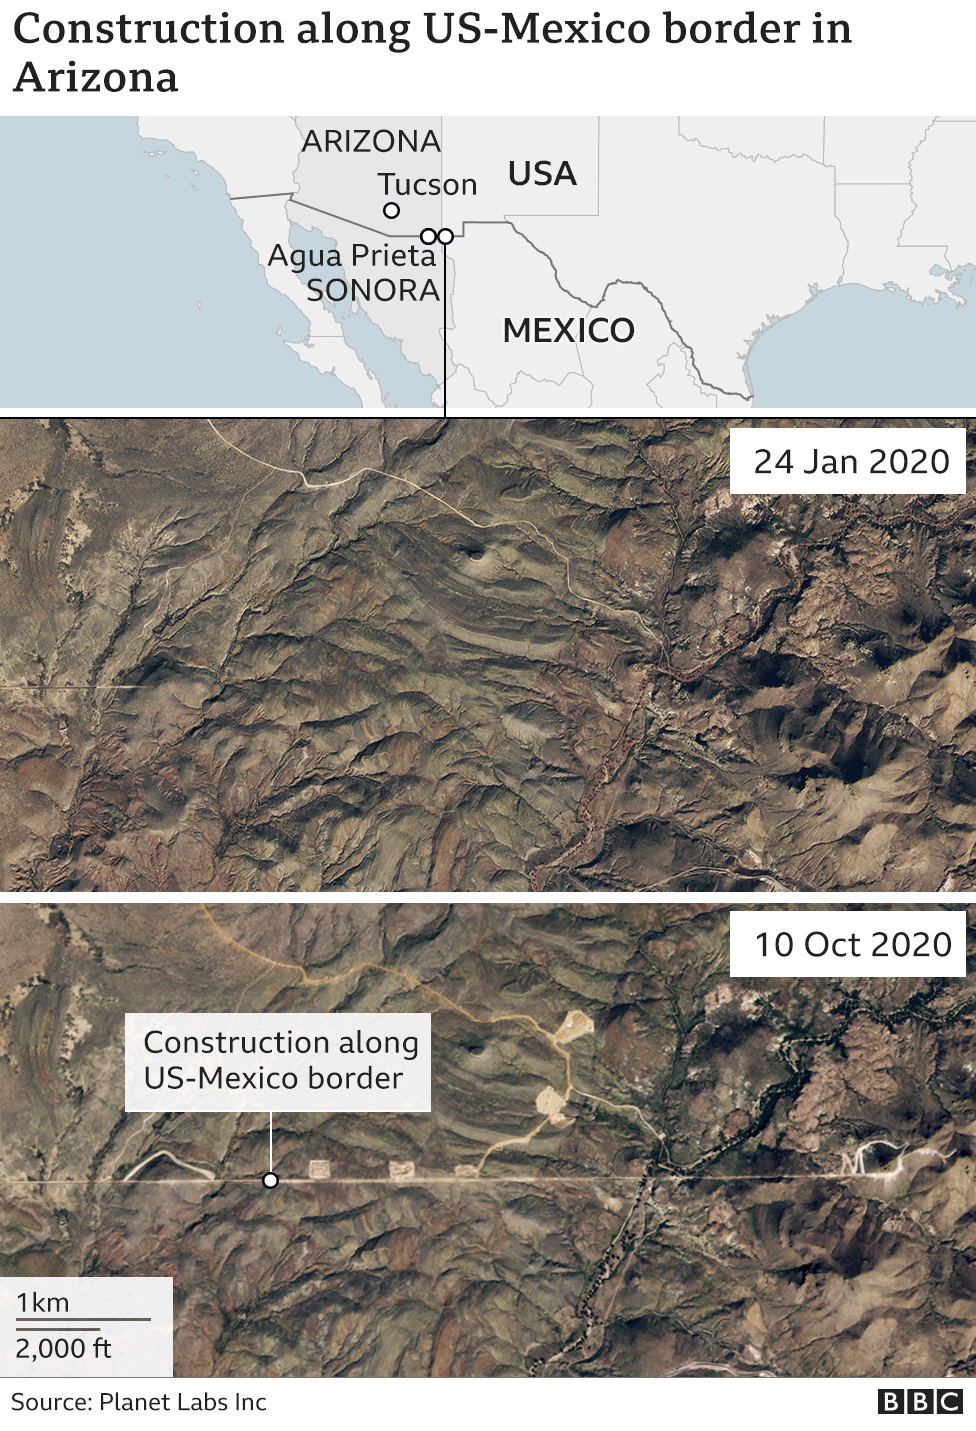 Satellite images show recent construction work along the border